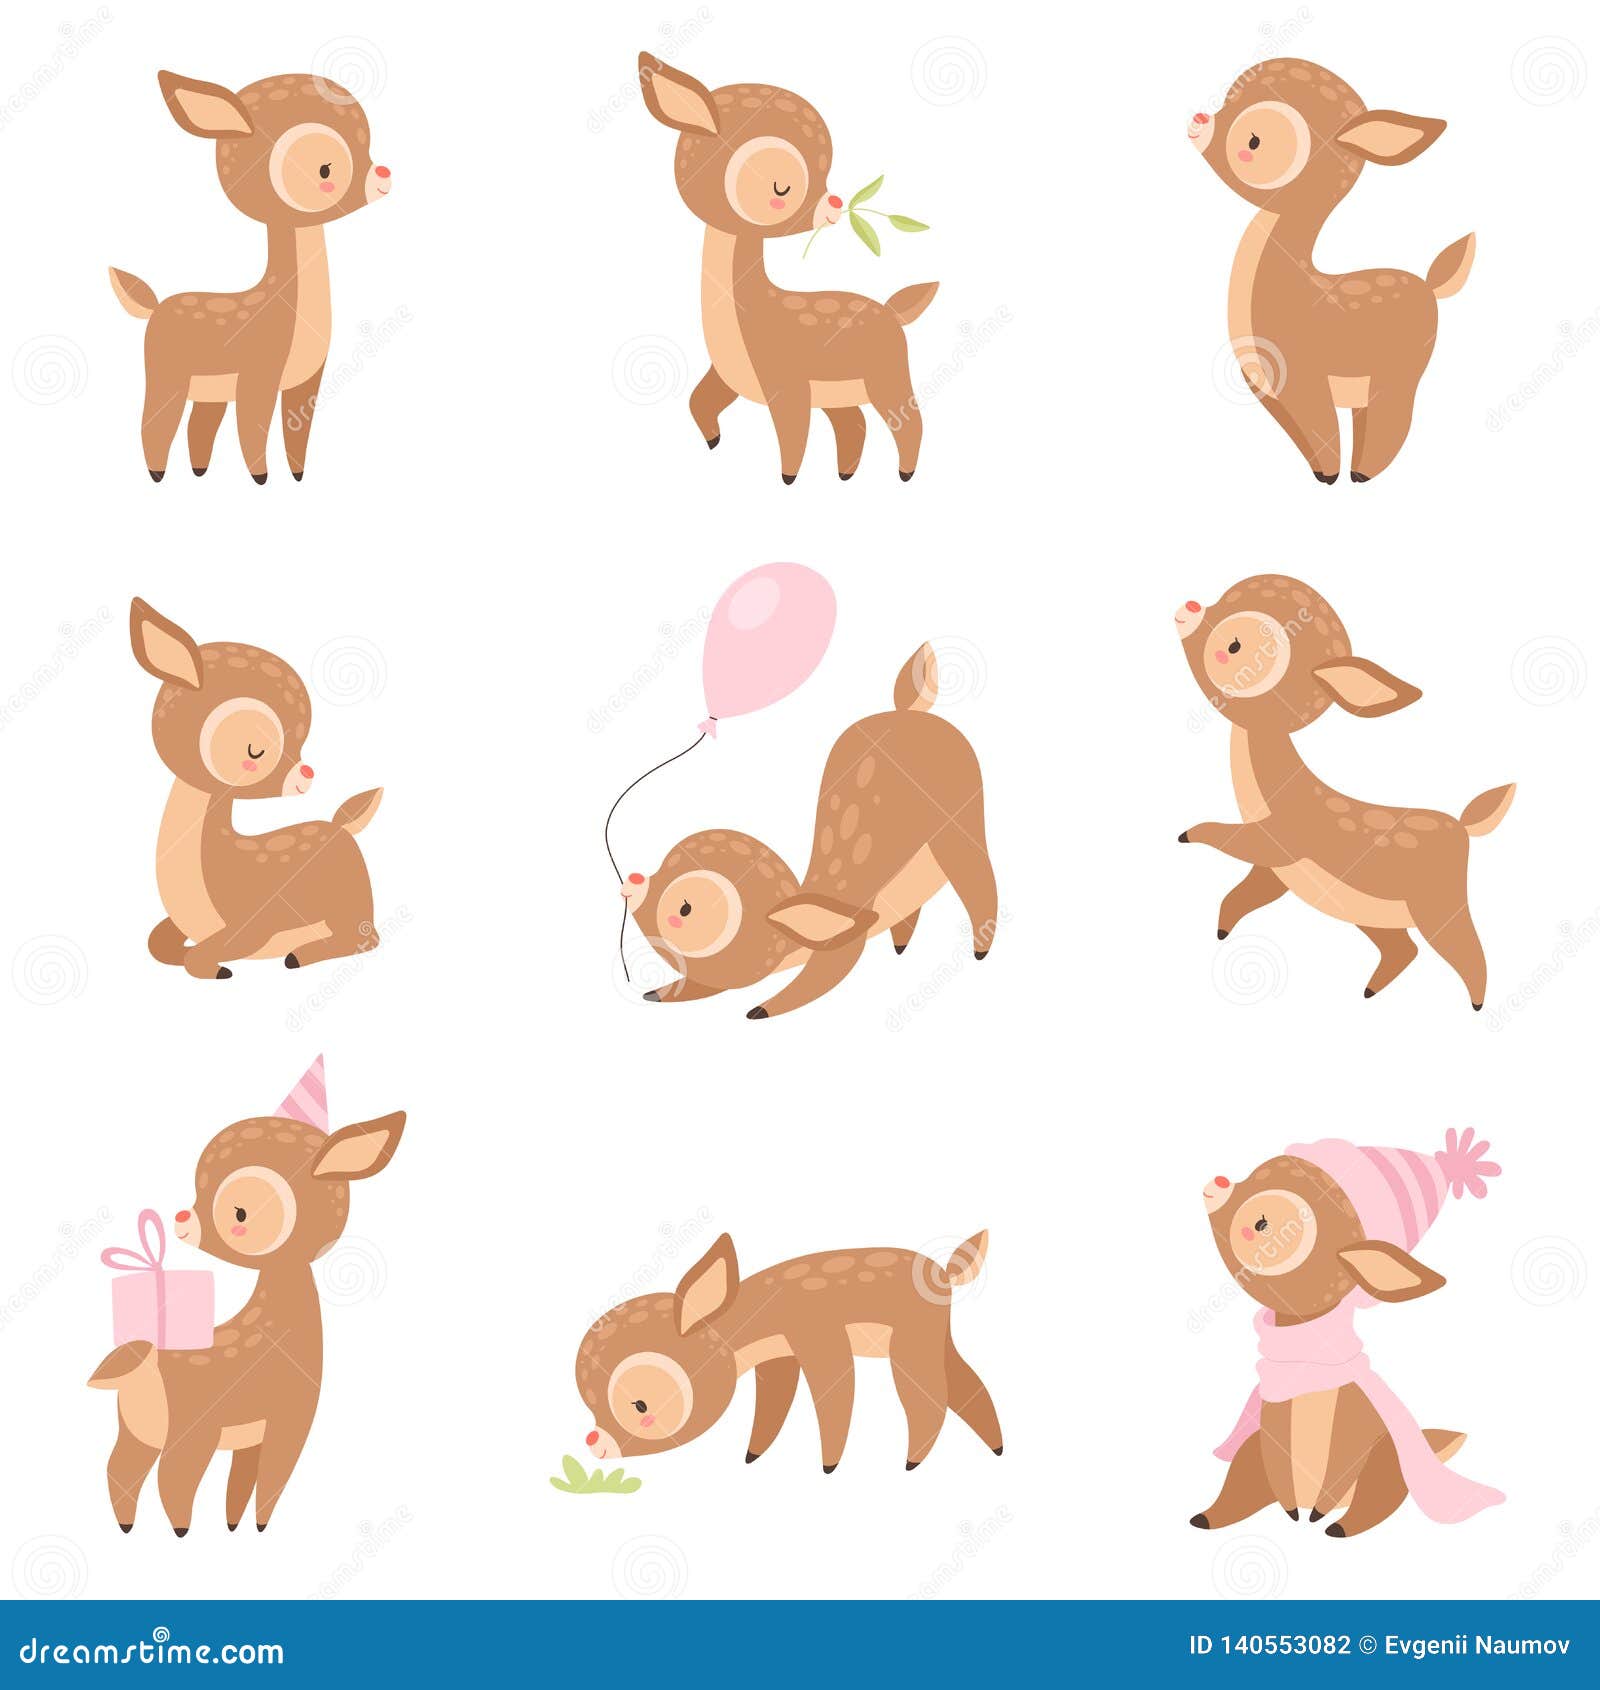 Download Cute Baby Deer, Adorable Brown Forest Animal In Different ...